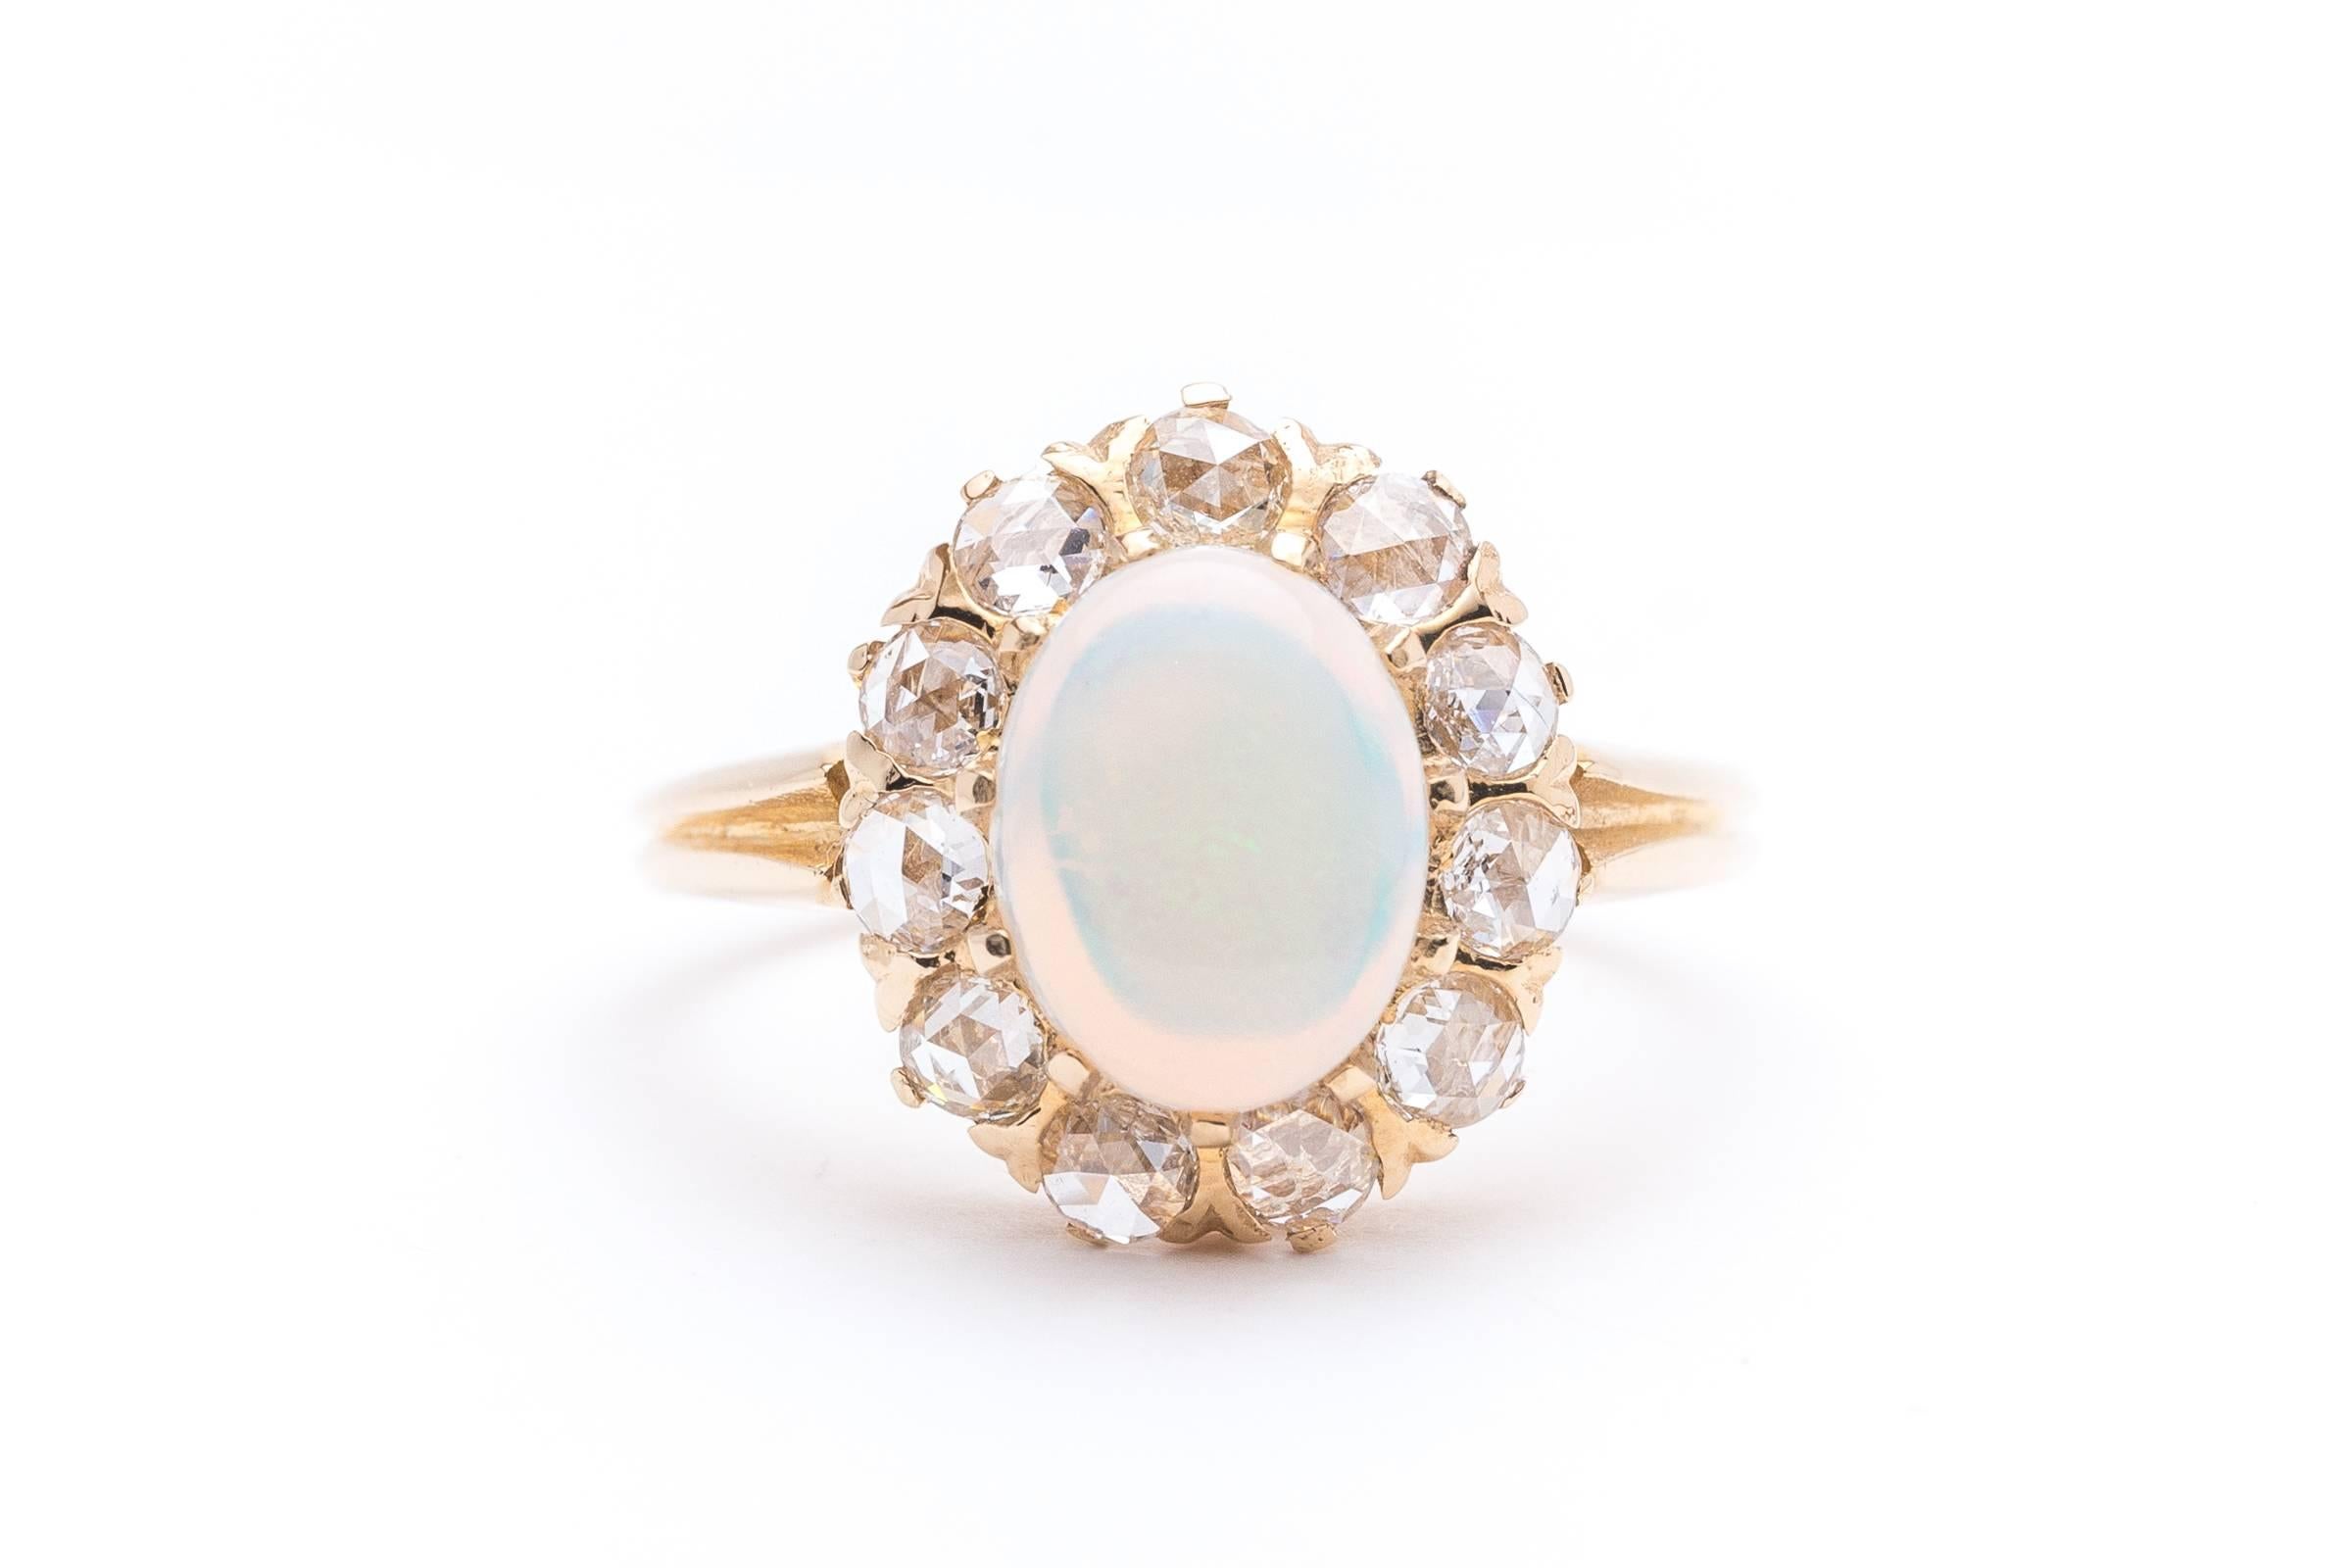 Beacon Hill Jewelers Presents:

A beautiful handmade opal and rose cut diamond ring in 14 karat yellow gold. Beautifully handcrafted, this victorian ring features a beautiful jelly opal surrounded by eleven large rose cut diamonds.

Measuring in